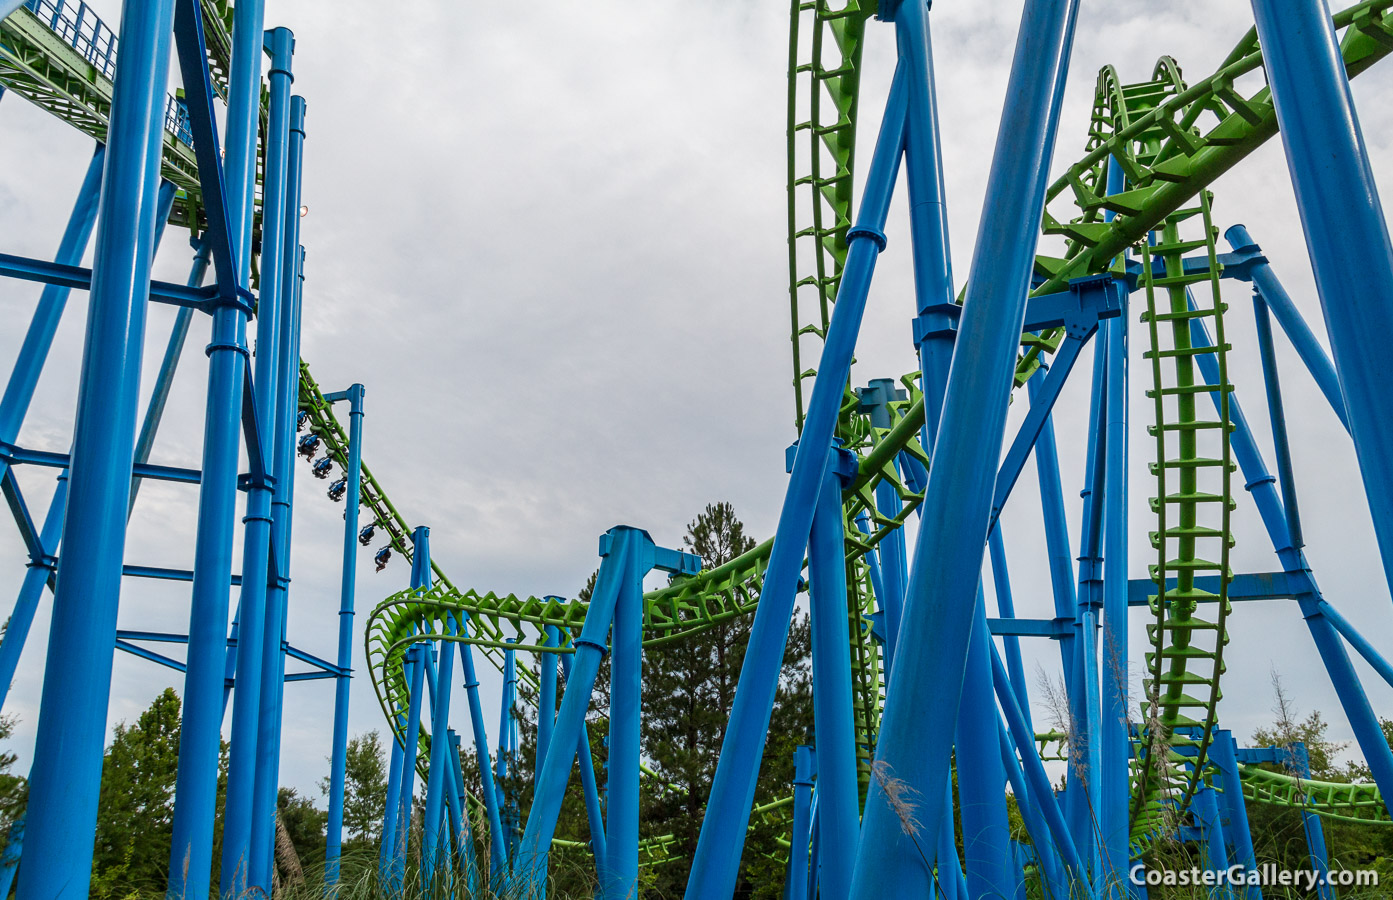 Suspended Thrill Coasters will replace Suspended Looping Coasters